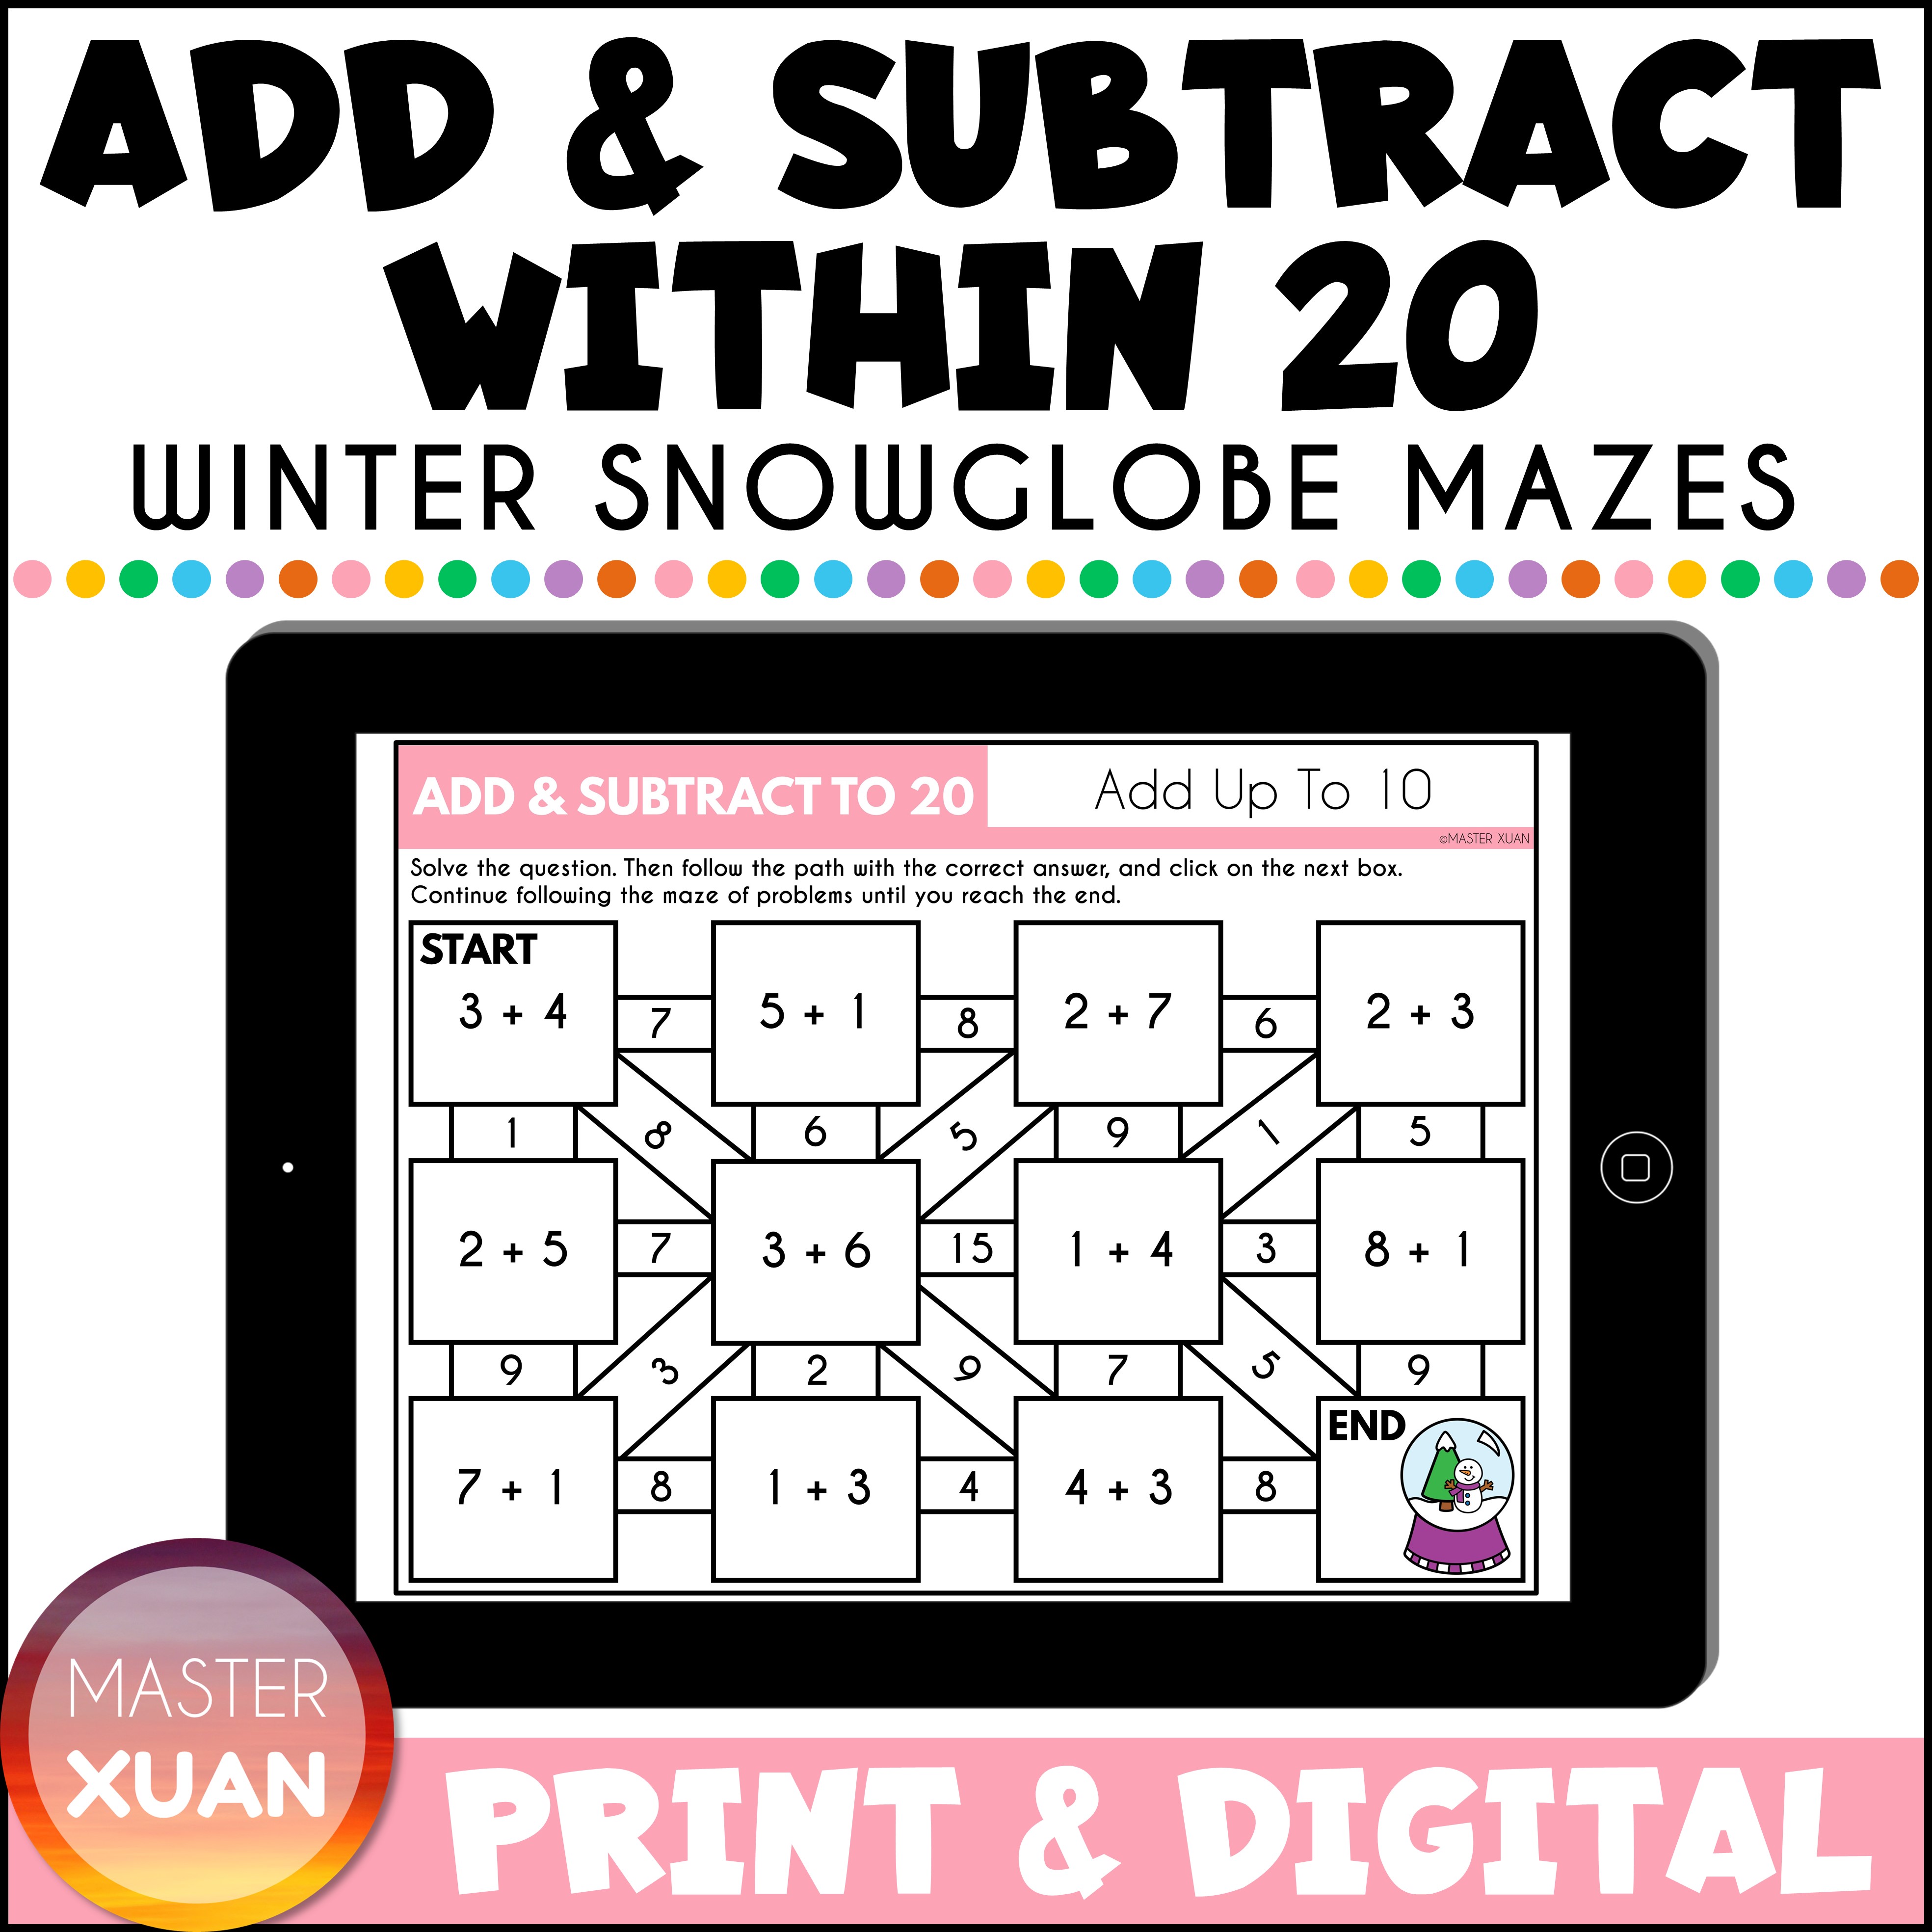 Add and subtract within 20 winter snowglobe mazes with printable and Boom Cards.